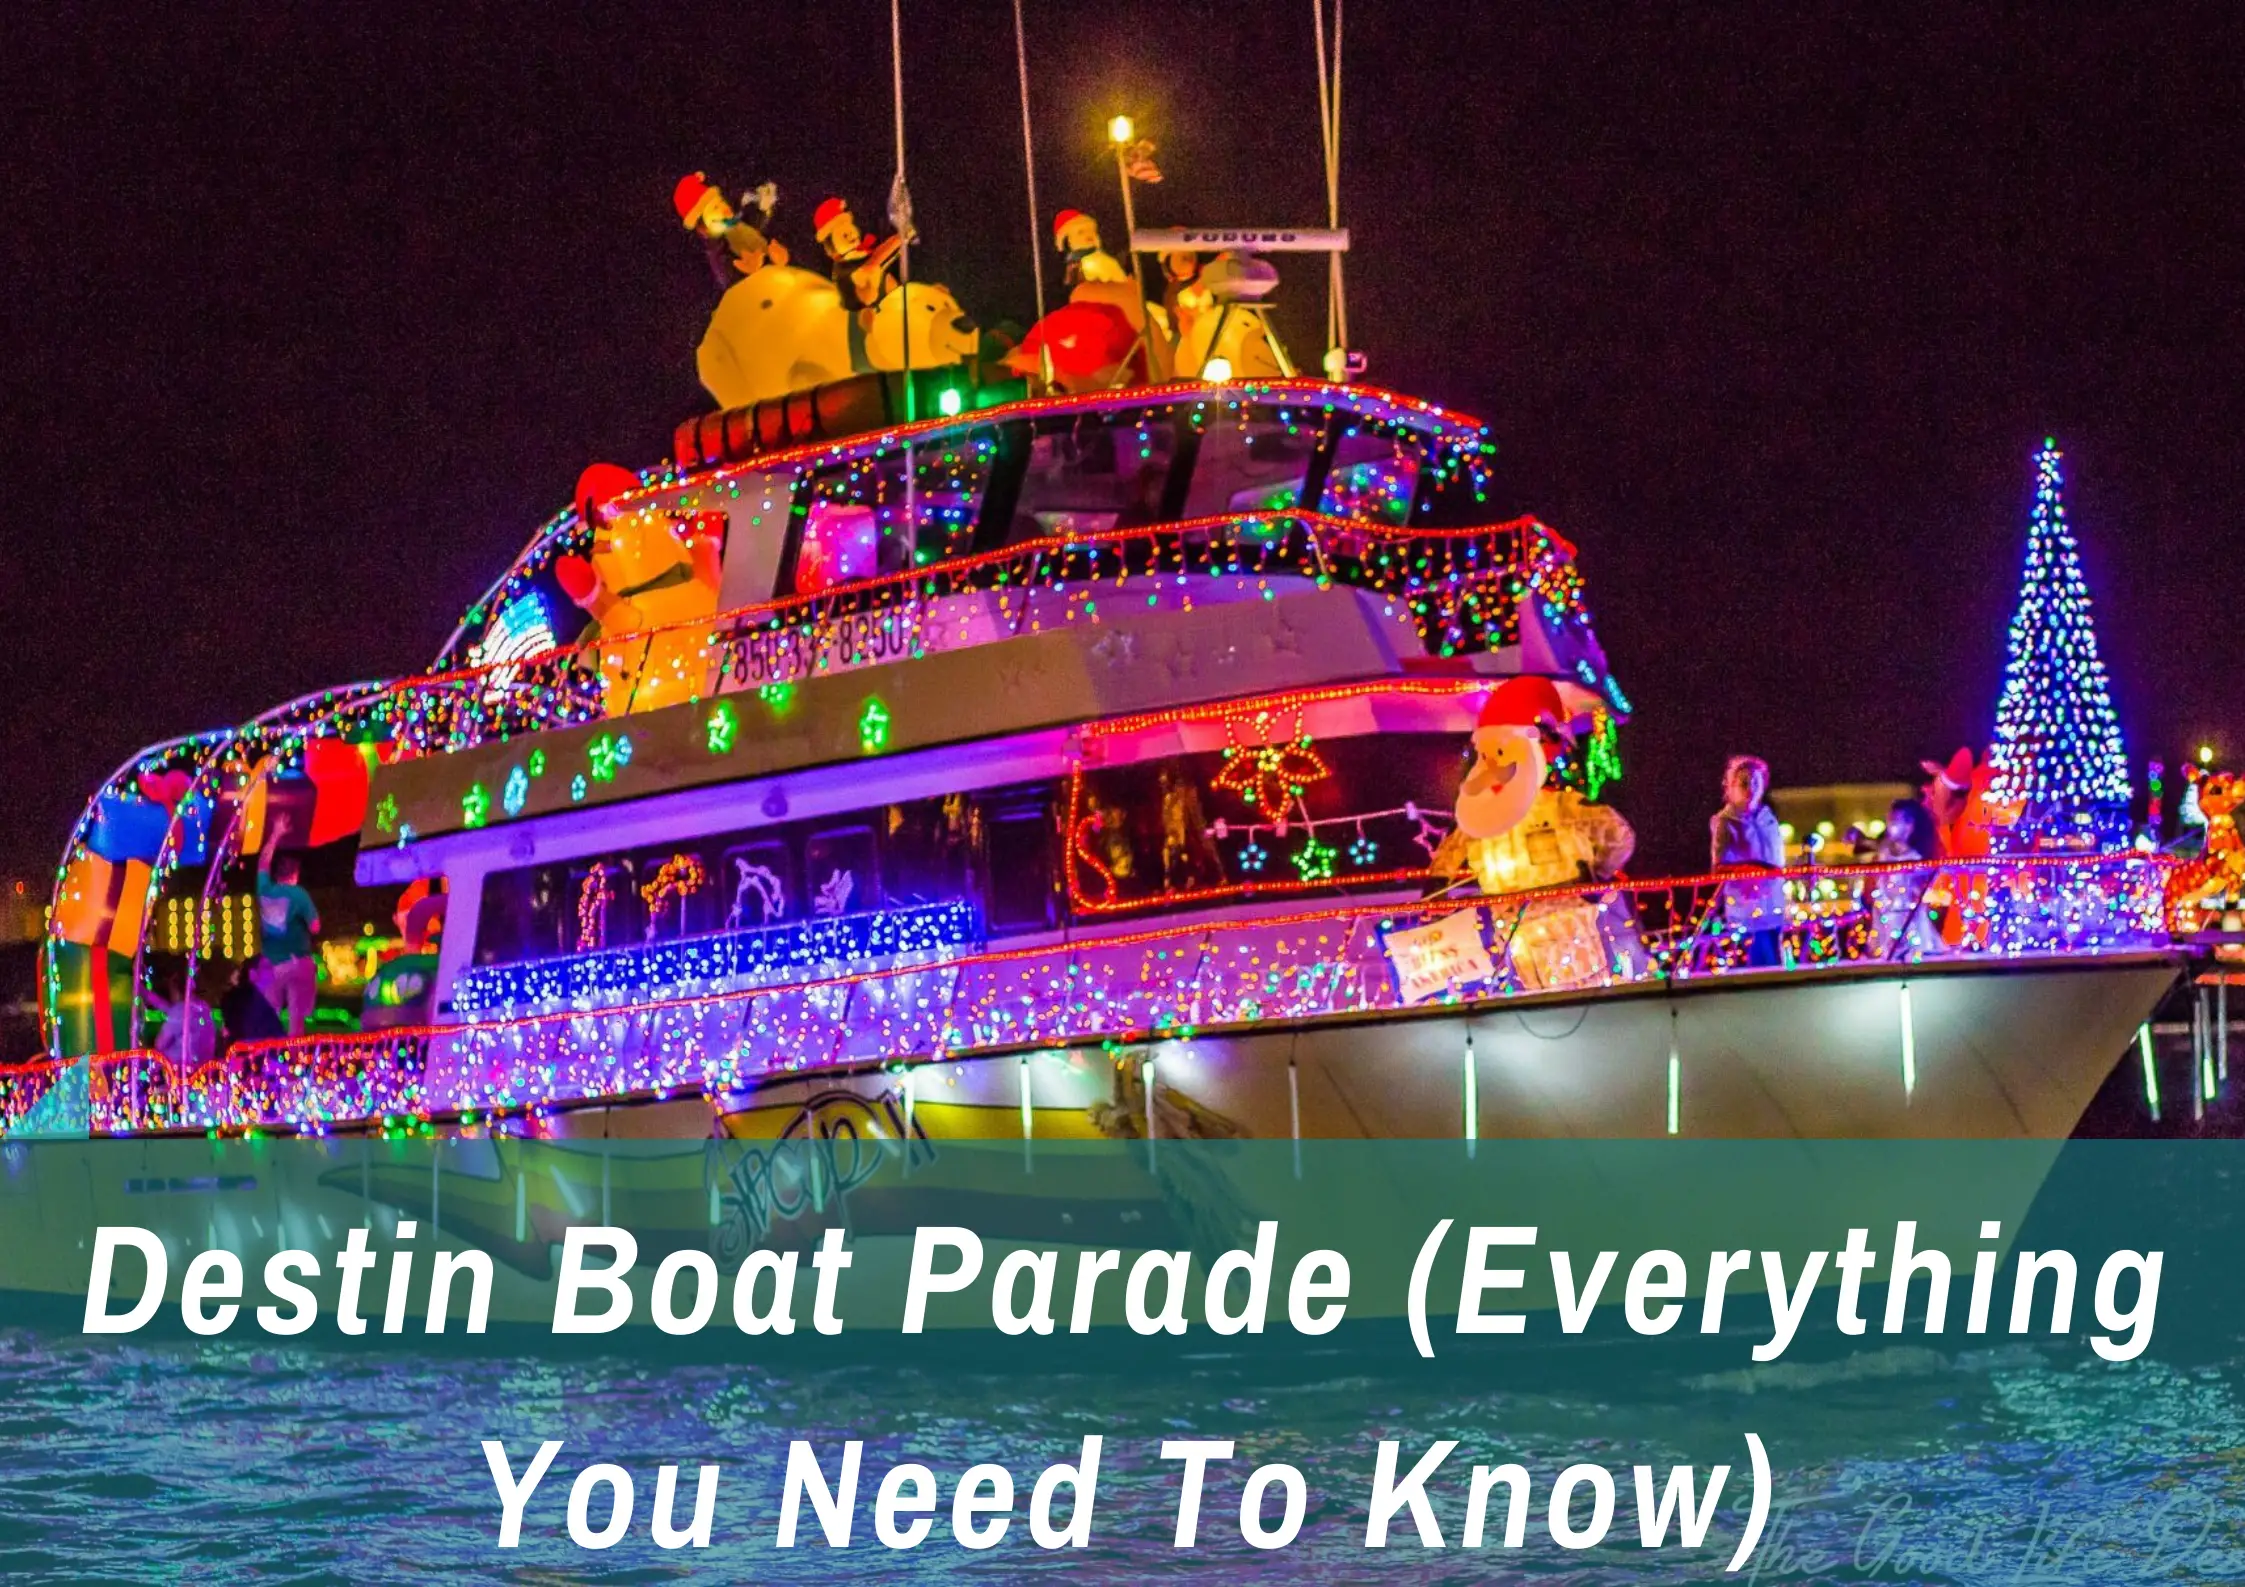 You are currently viewing Destin Boat Parade: The Complete Guide